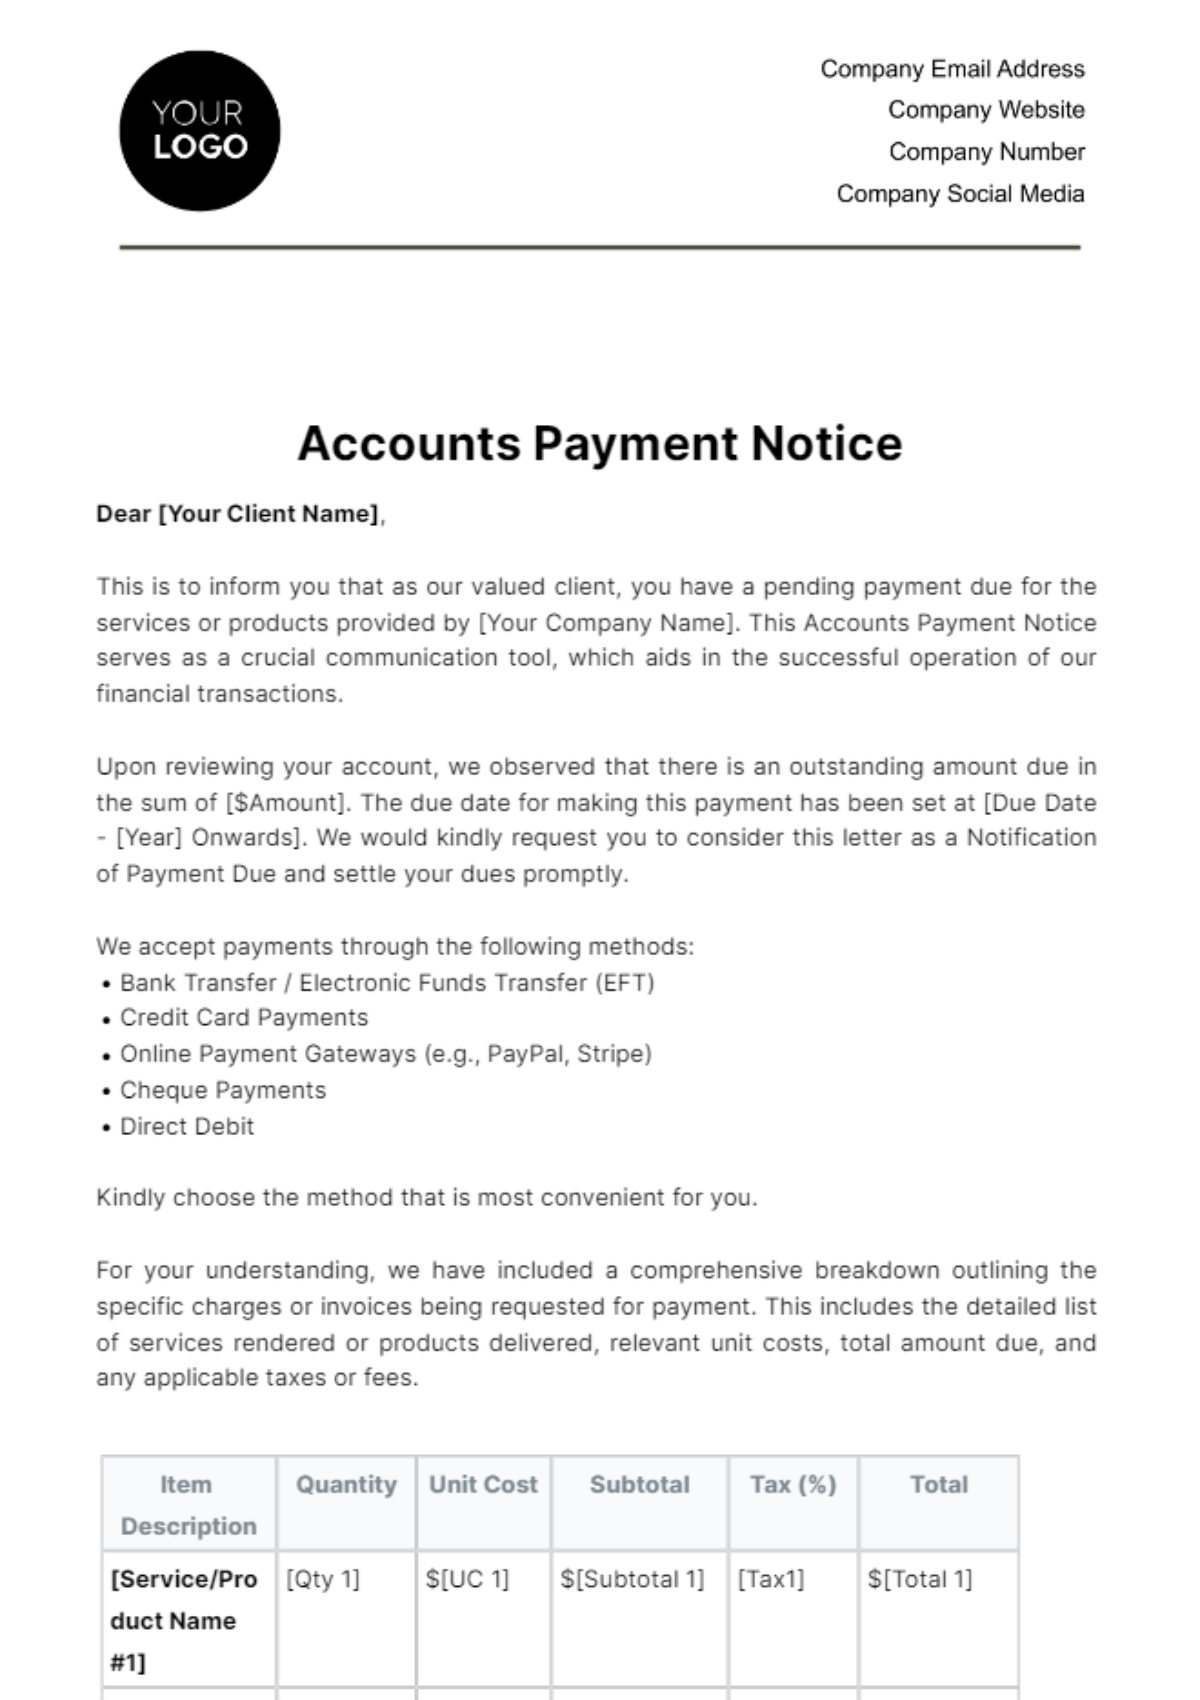 Accounts Payment Notice Template